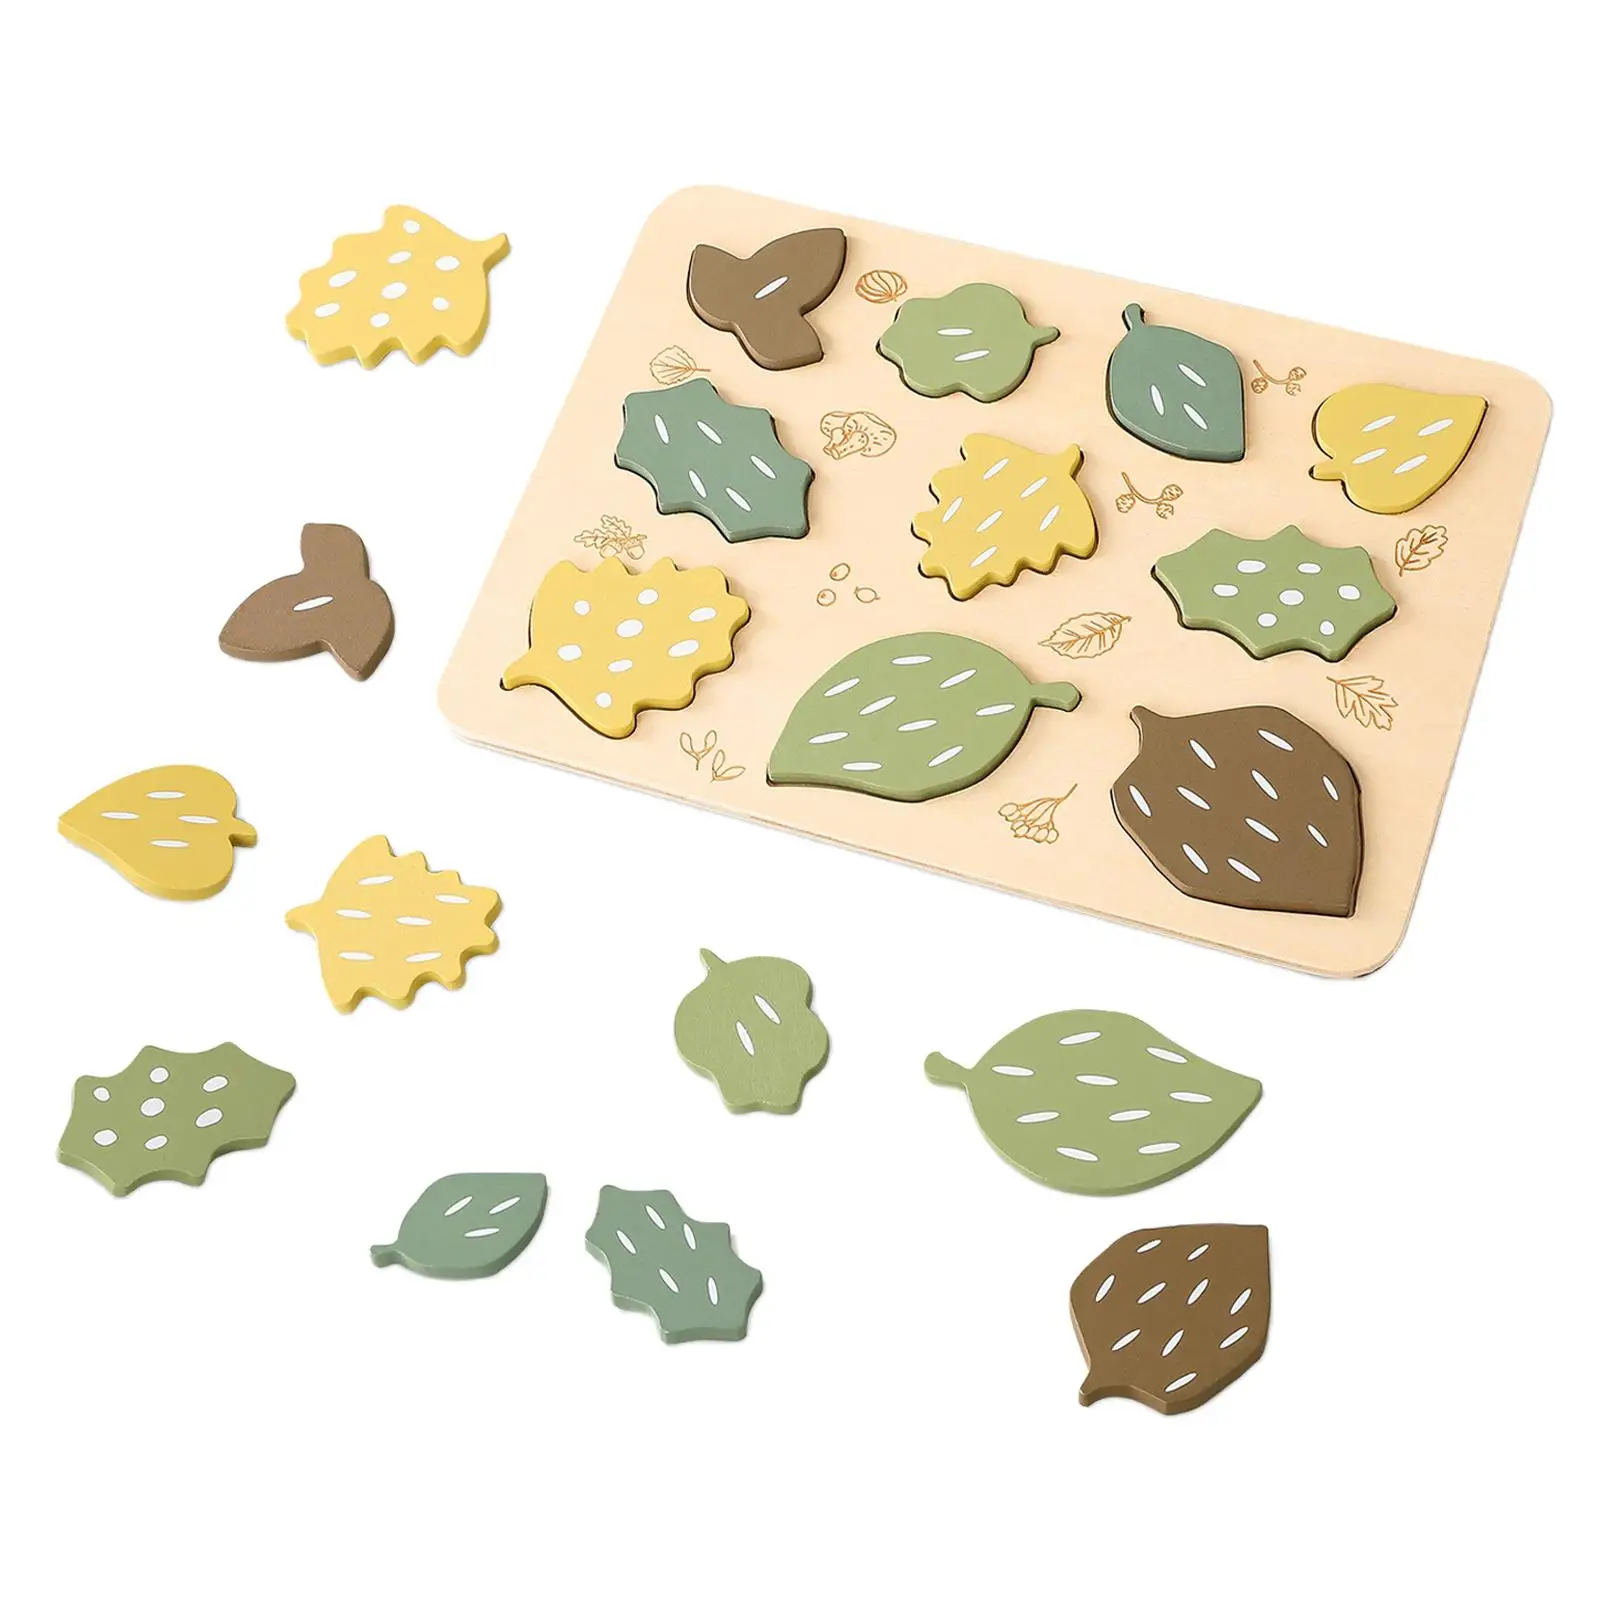 Wooden Leaf Jigsaw Puzzles Counting Puzzle Hand Eye Coordination Fine Motor Skill Stacking Blocks for Preschool Kids Toddlers